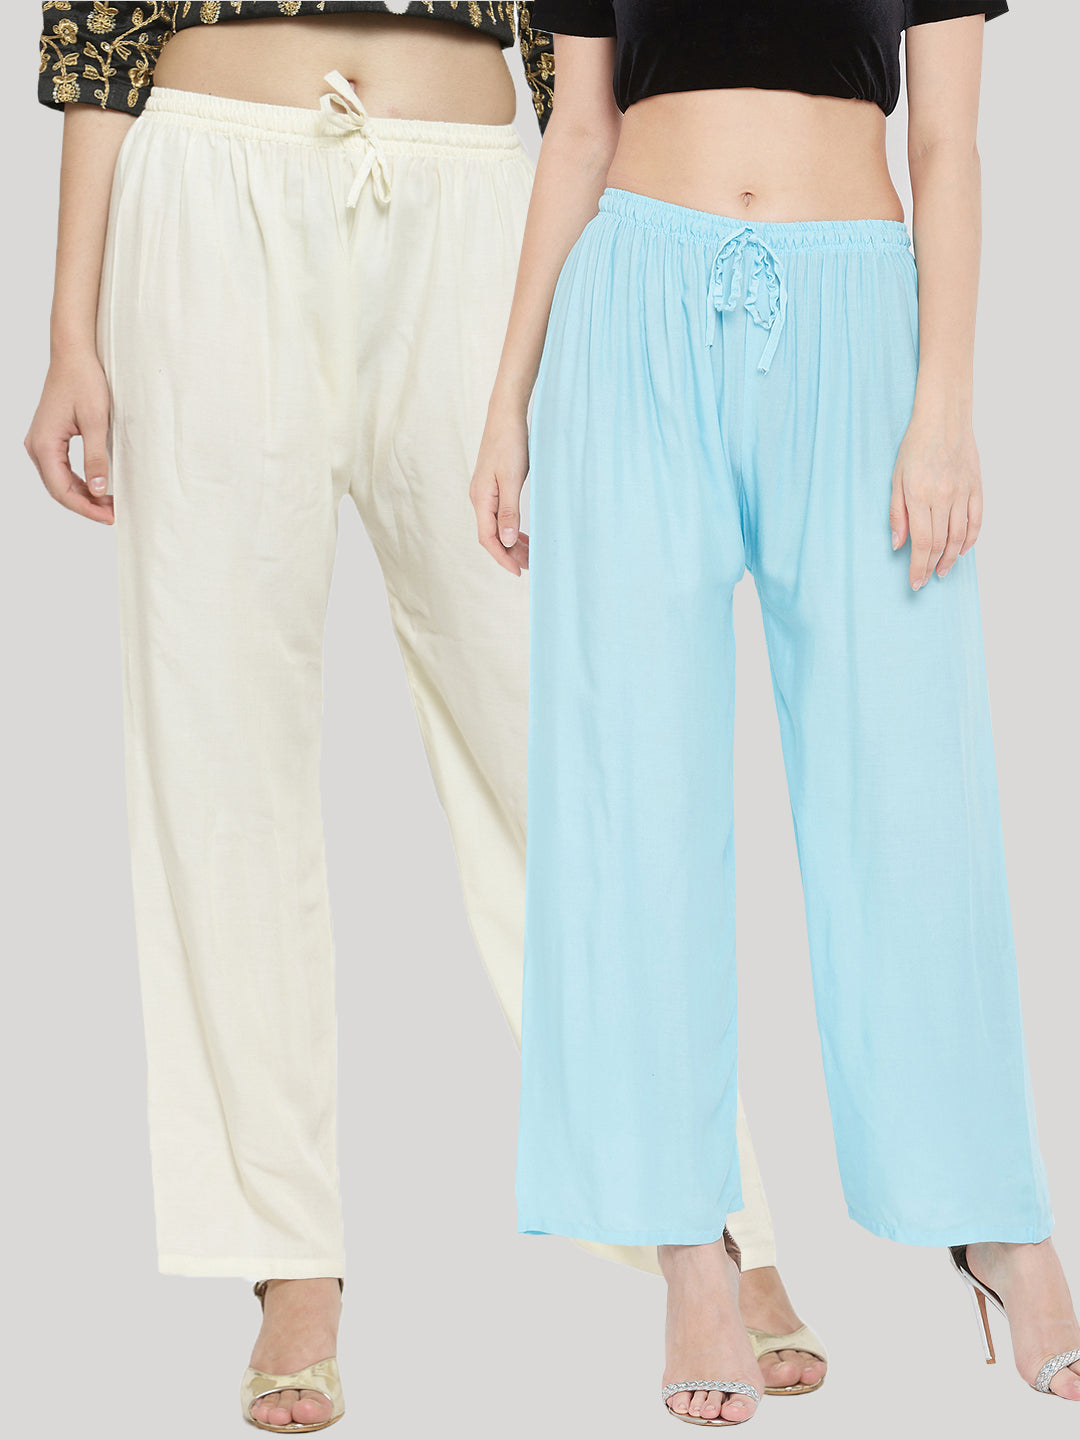 Clora Solid Cream & Sky Blue Rayon Palazzo (Pack Of 2)